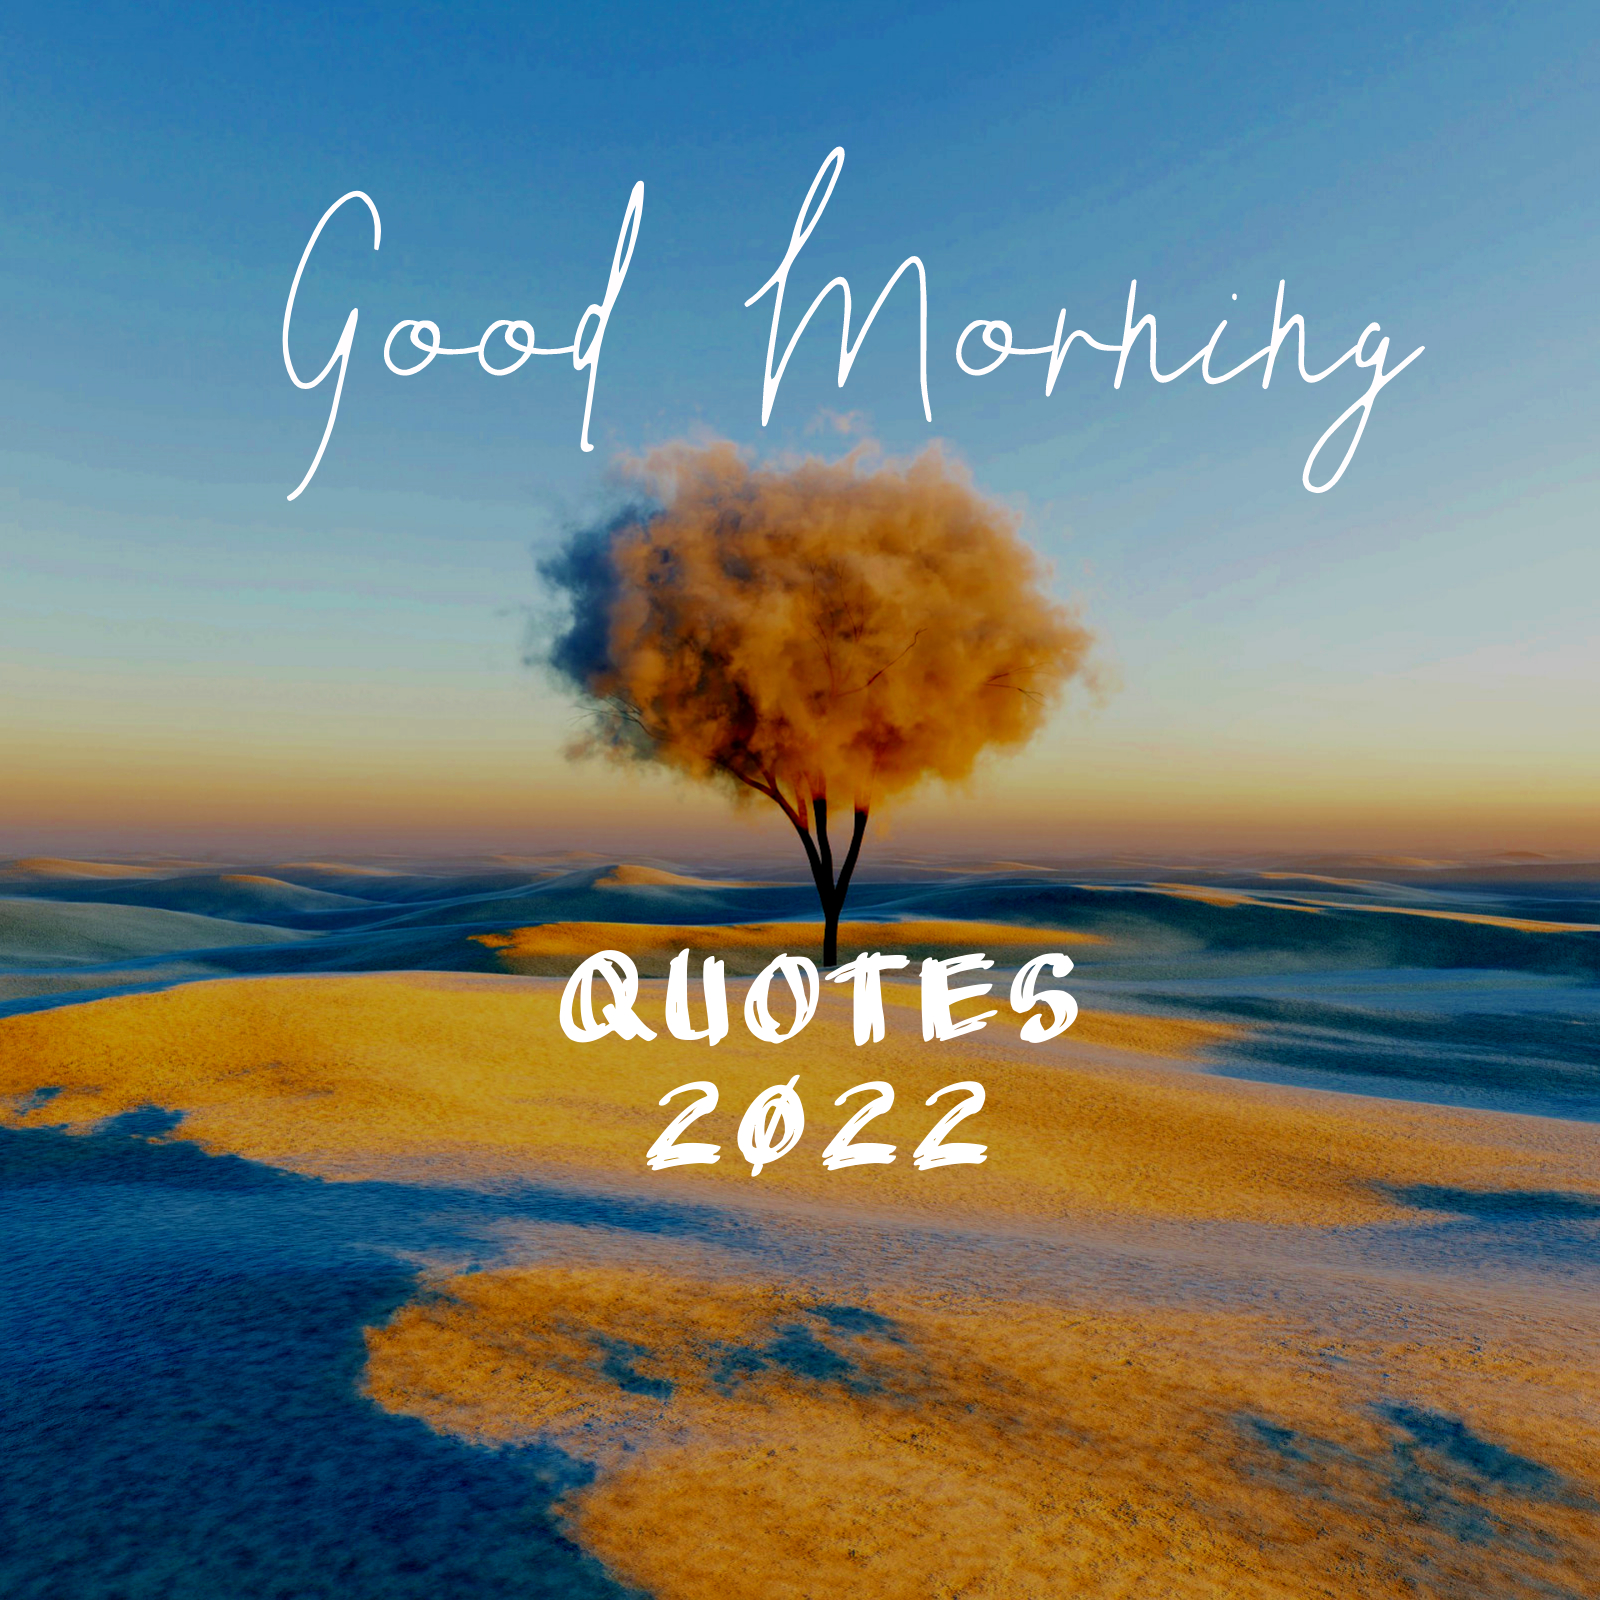 70 Good Morning Quotes in 2022